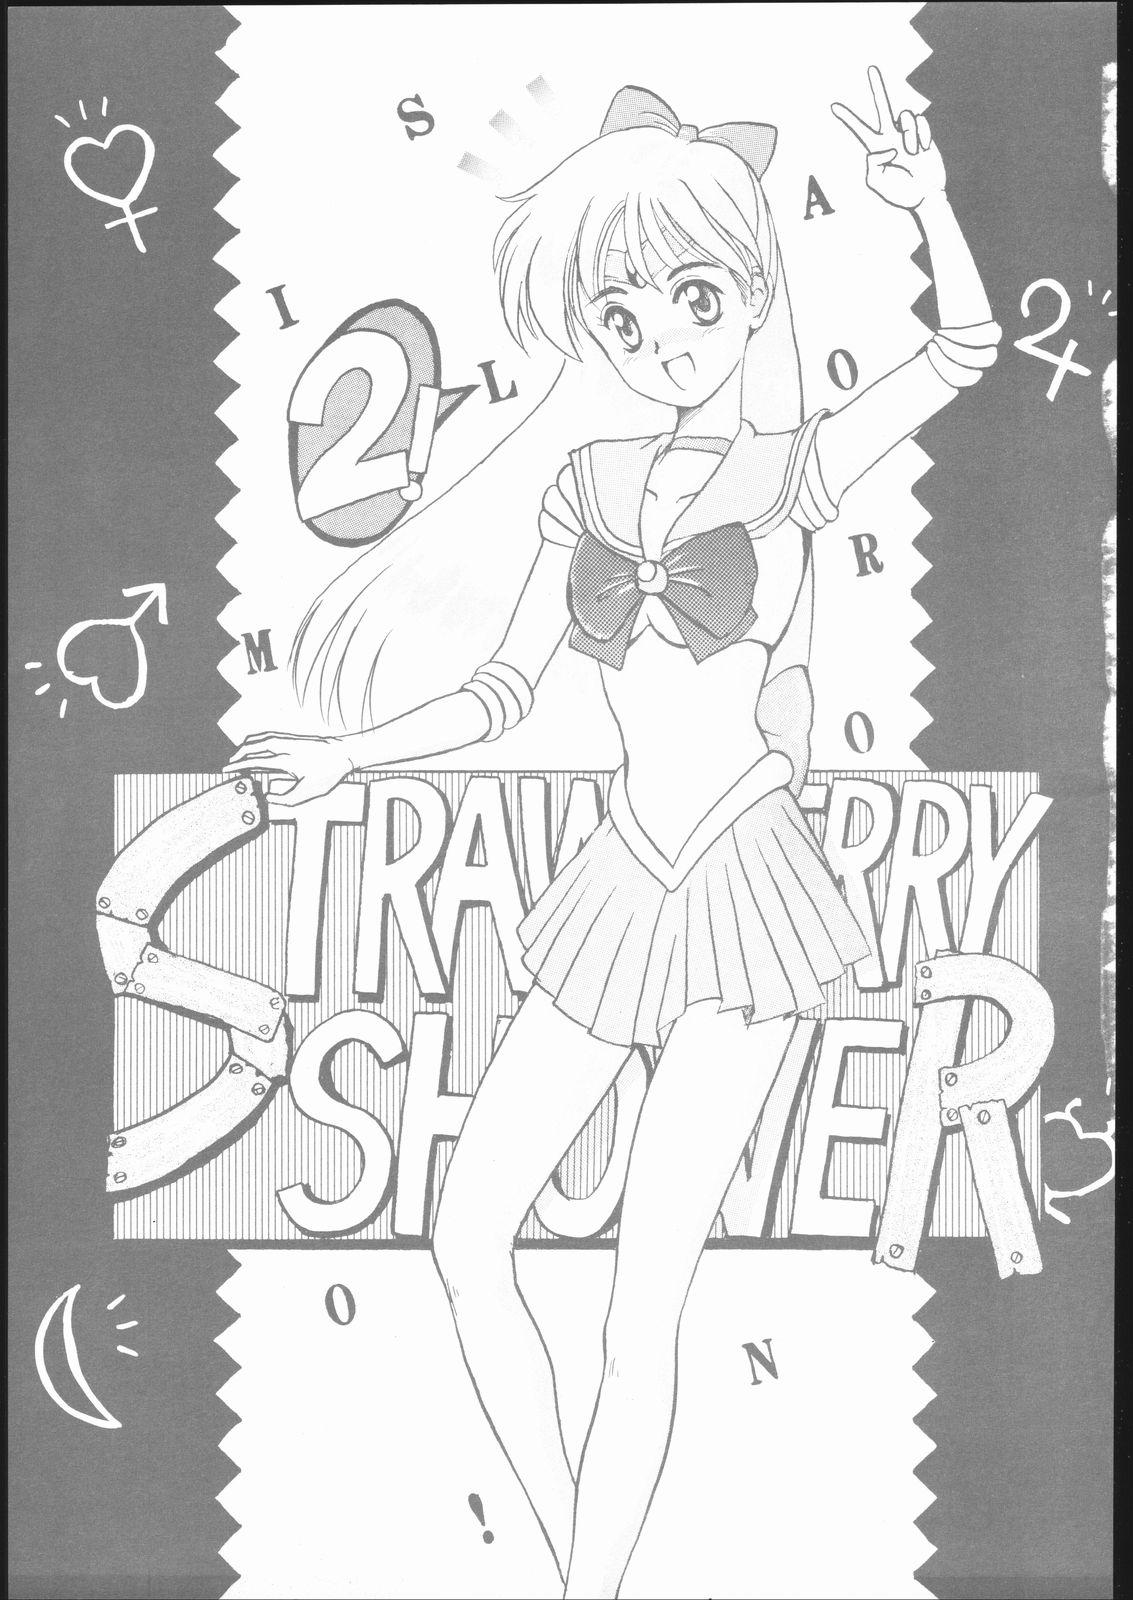 Jerk Strawberry Shower 2 - Sailor moon World heroes Glasses - Page 2